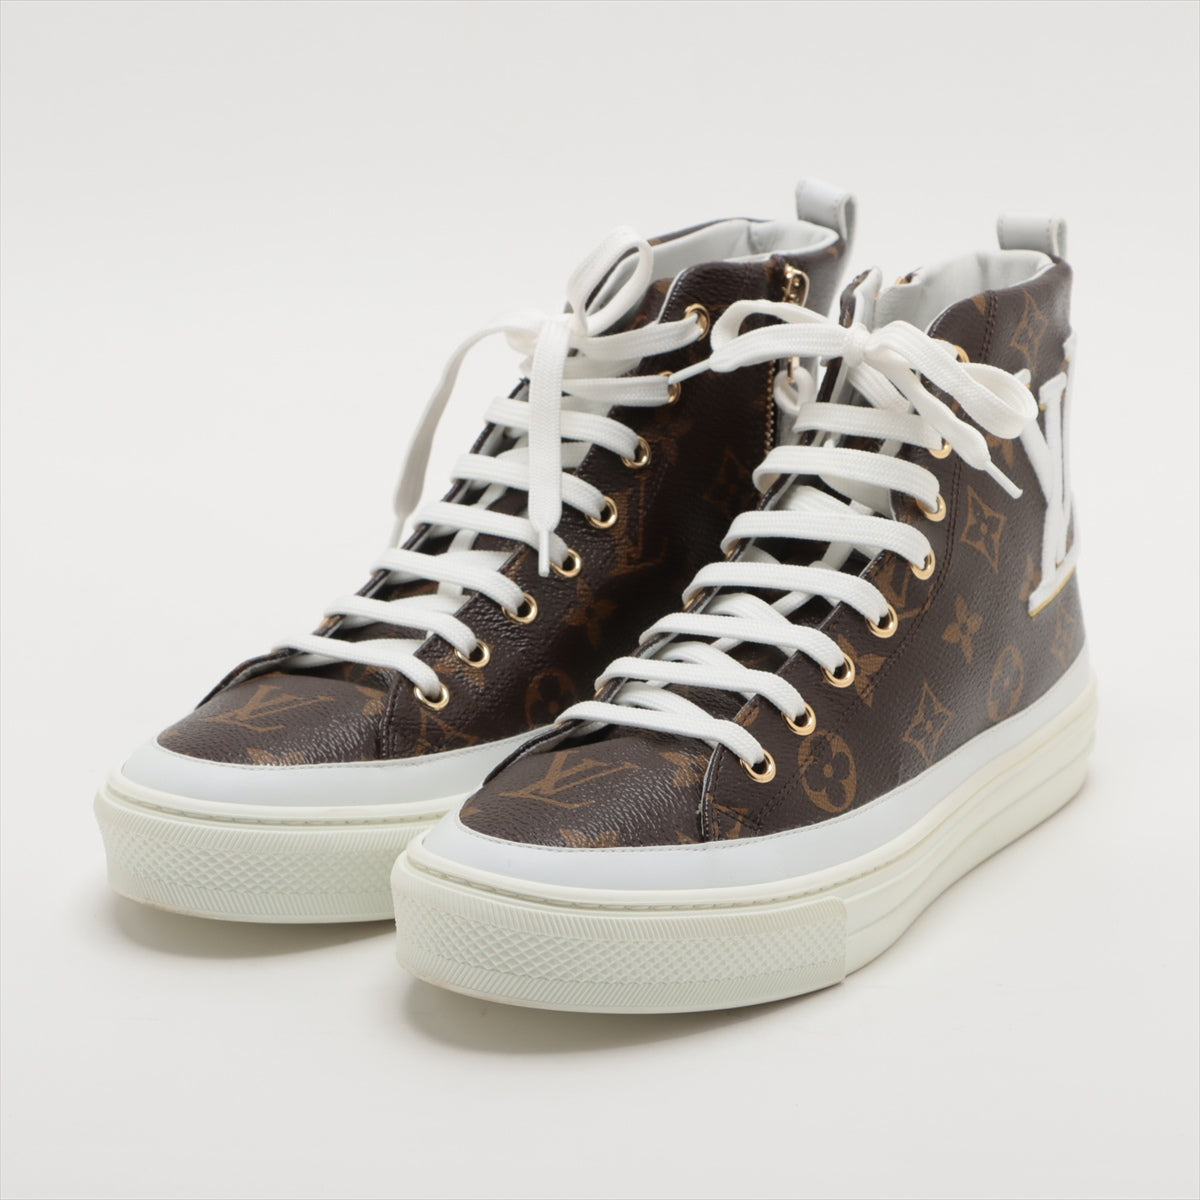 Louis Vuitton Stellar line 18 years Leather High-top Sneakers 37 Ladies' Brown CL0198 Monogram box sack Is there a replacement string